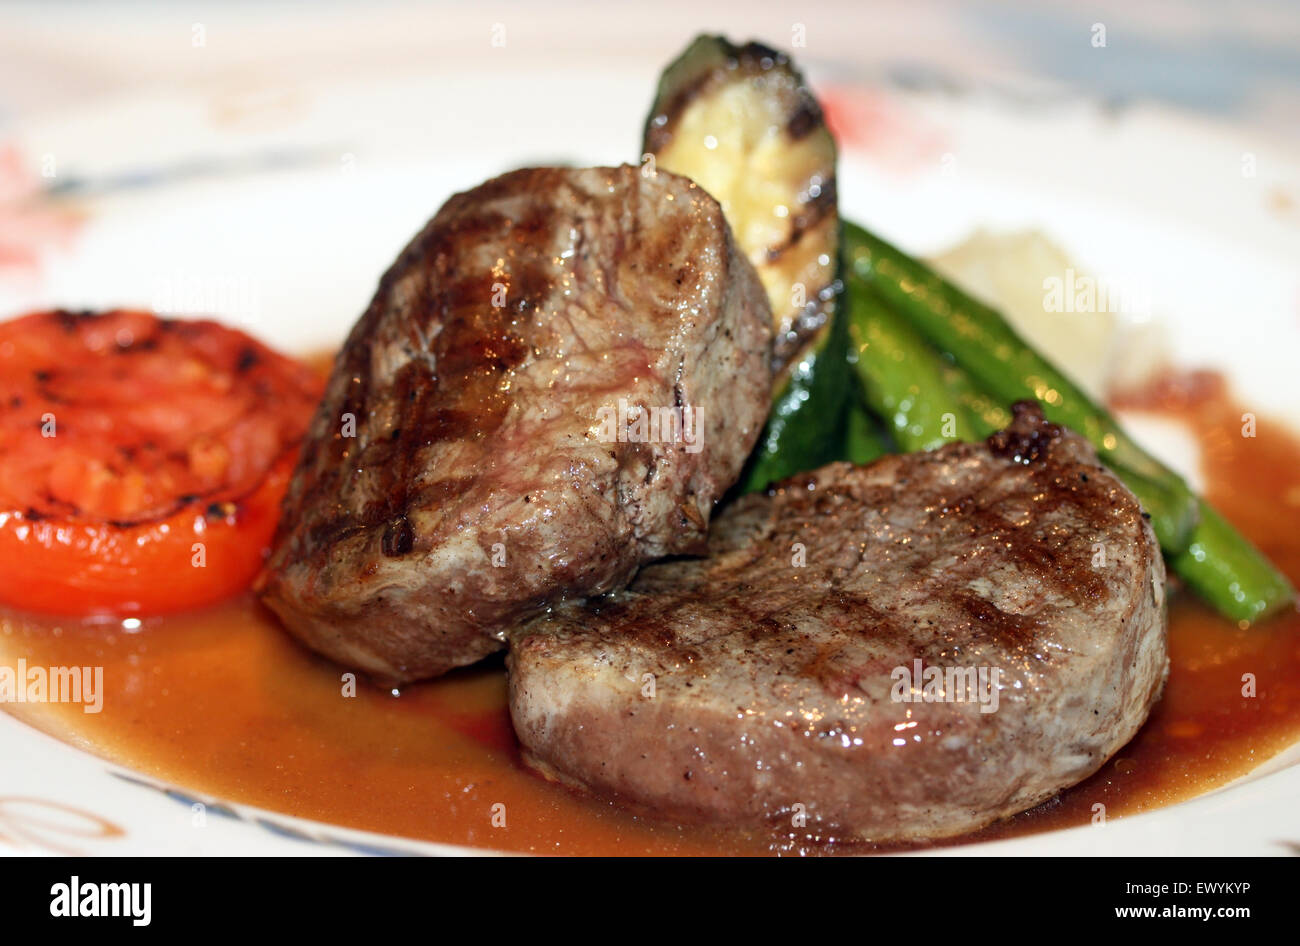 Delicious grilled fillet mignon at the restaurant Stock Photo